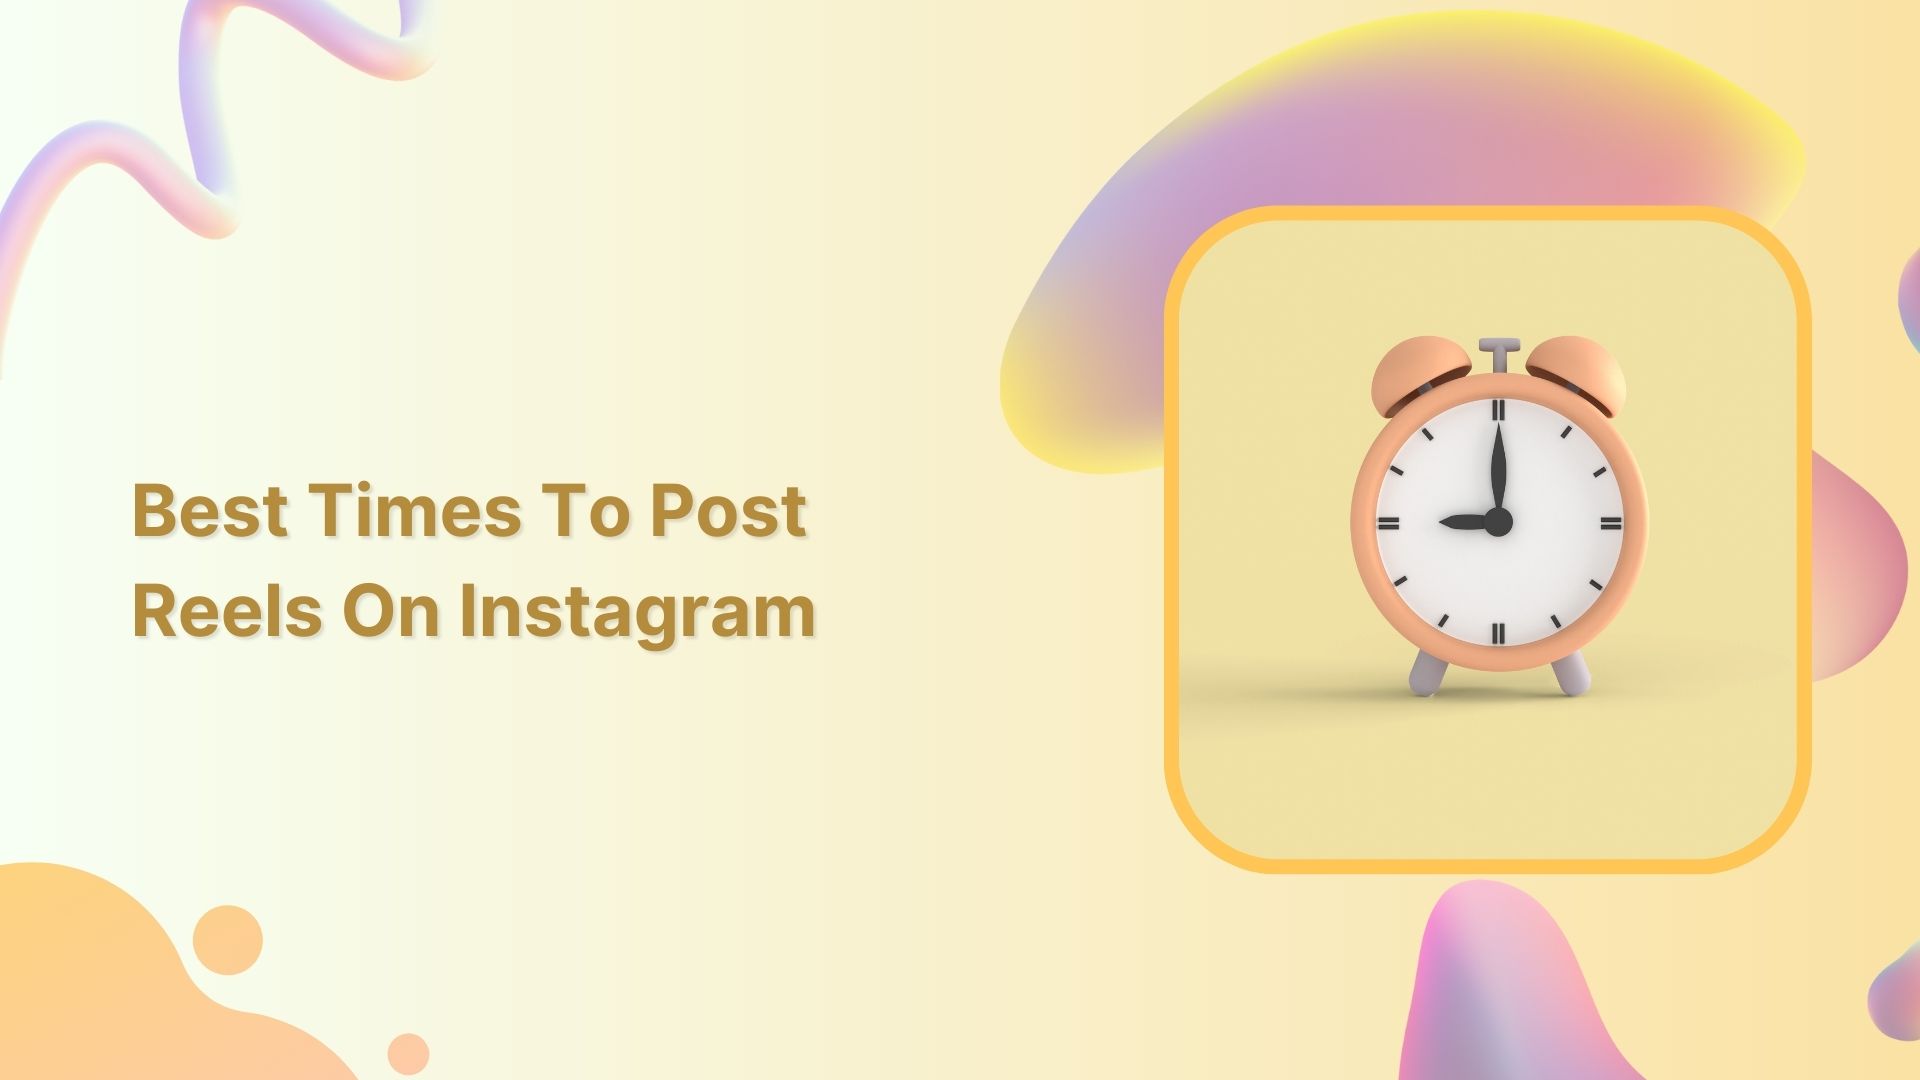 Guide on the best times to post instagram reels in 2023